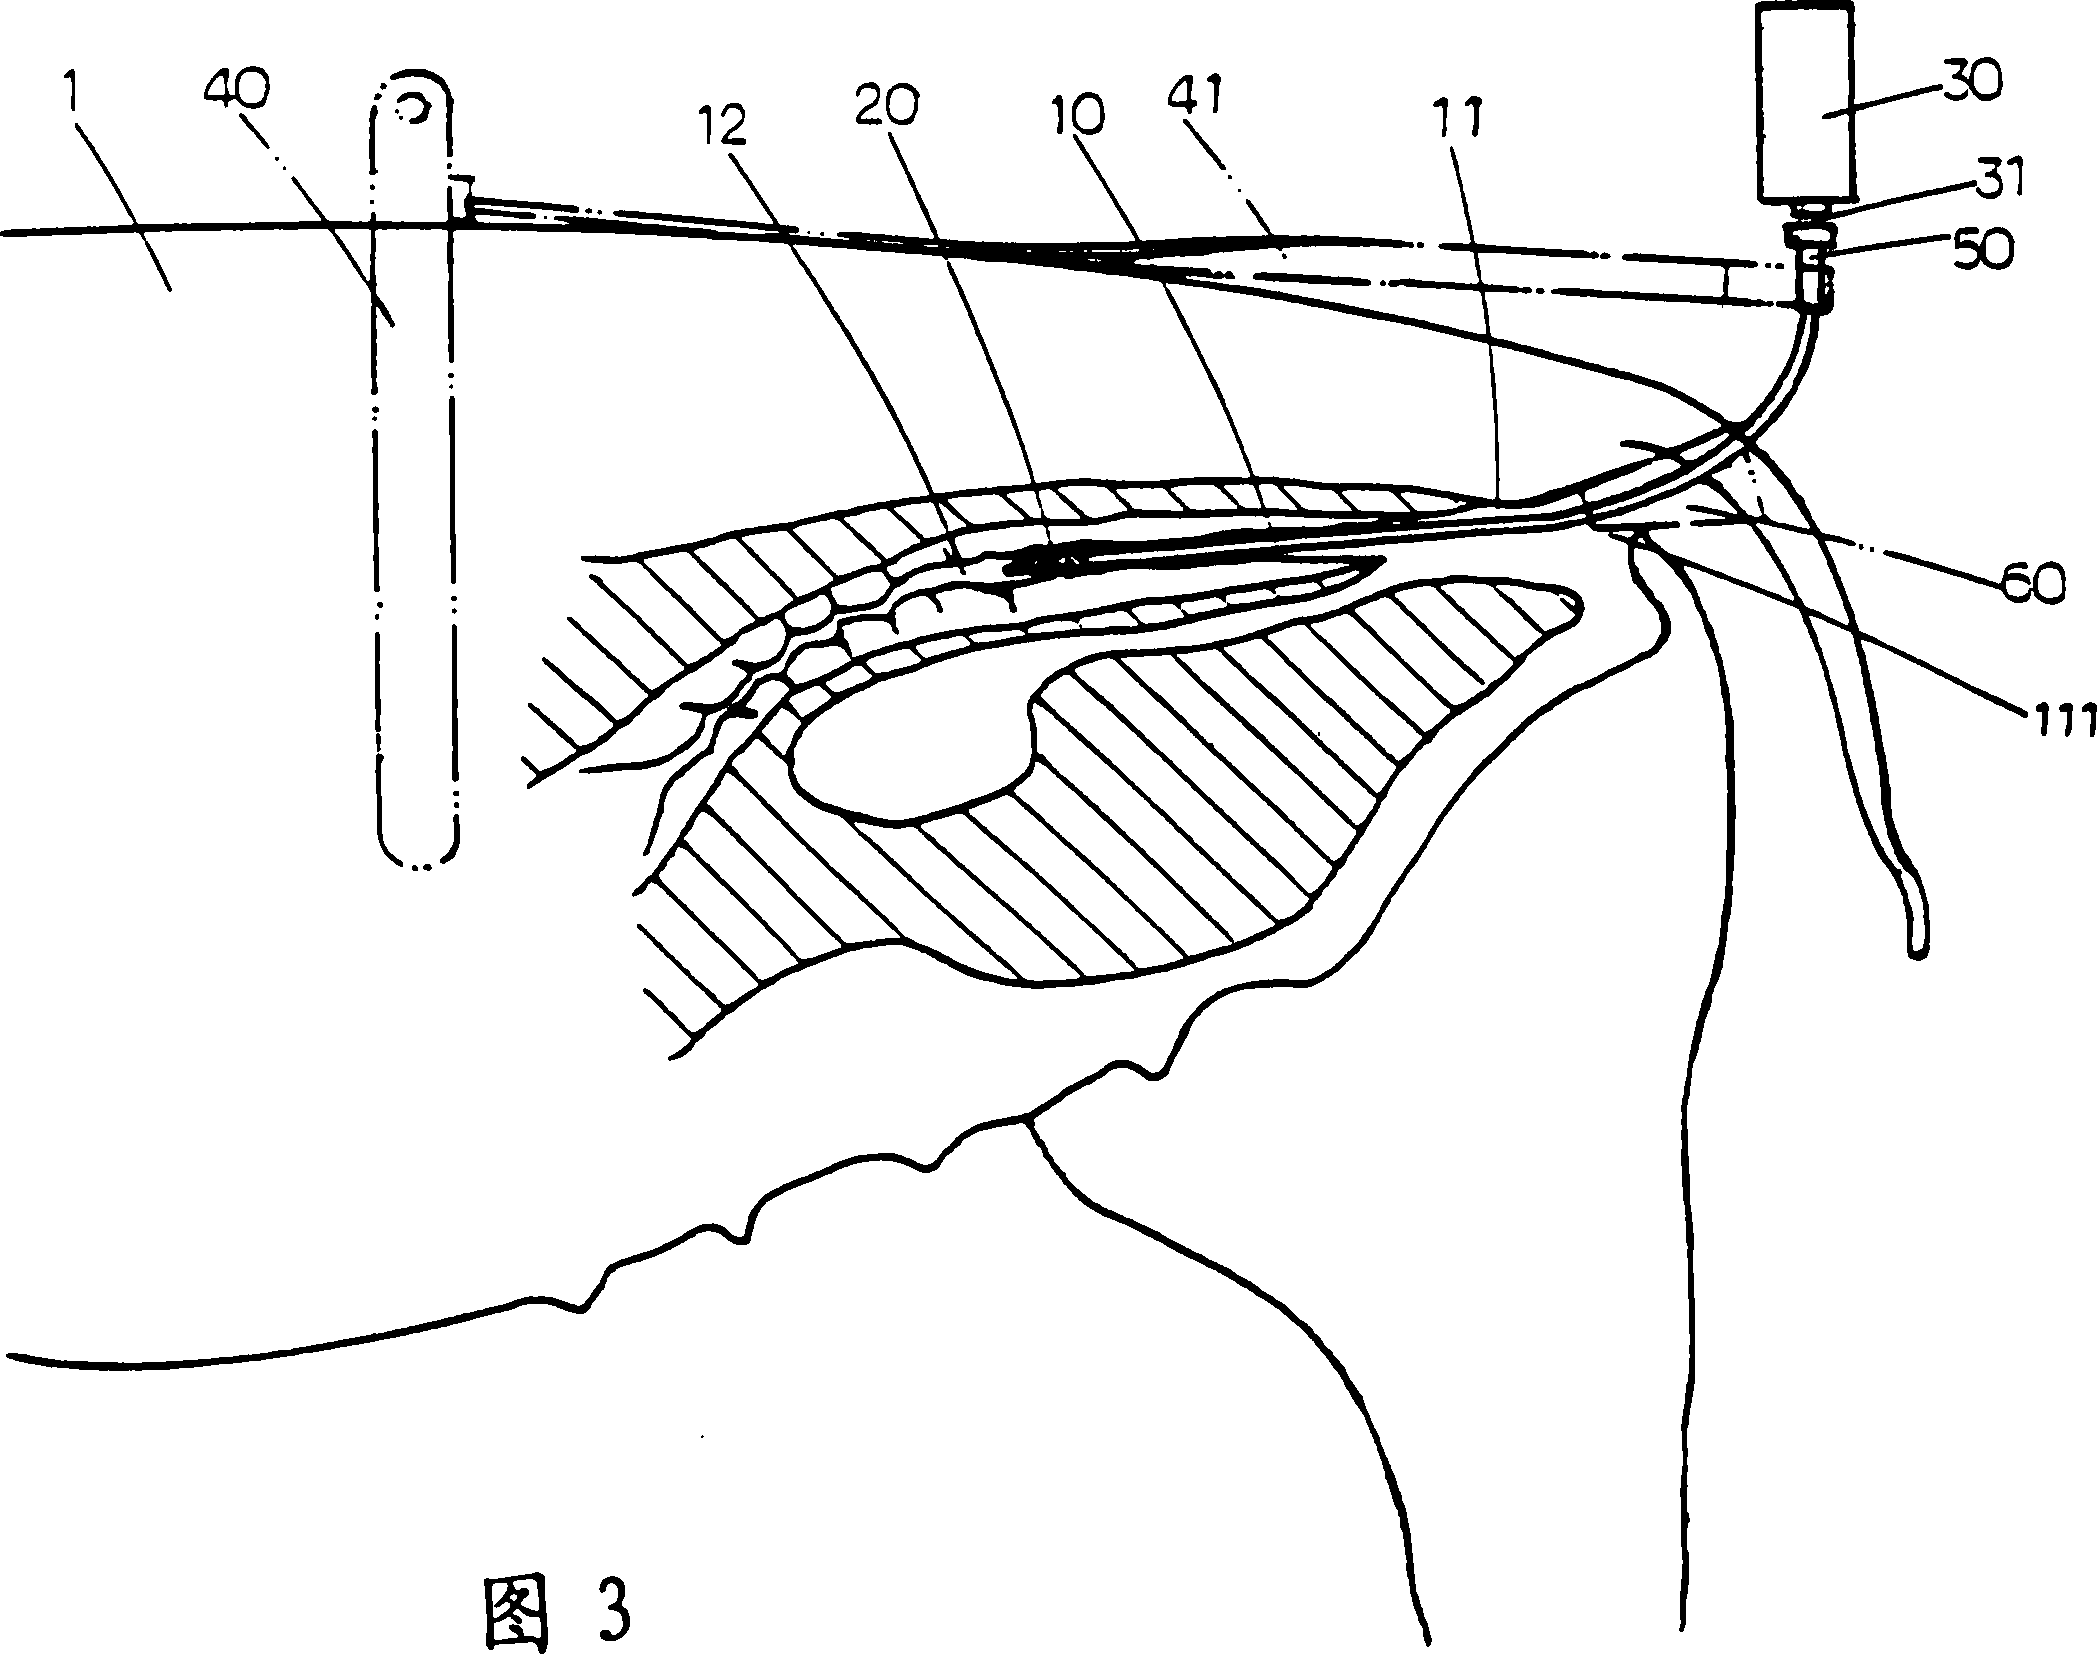 Artificial trace insemination device for animal